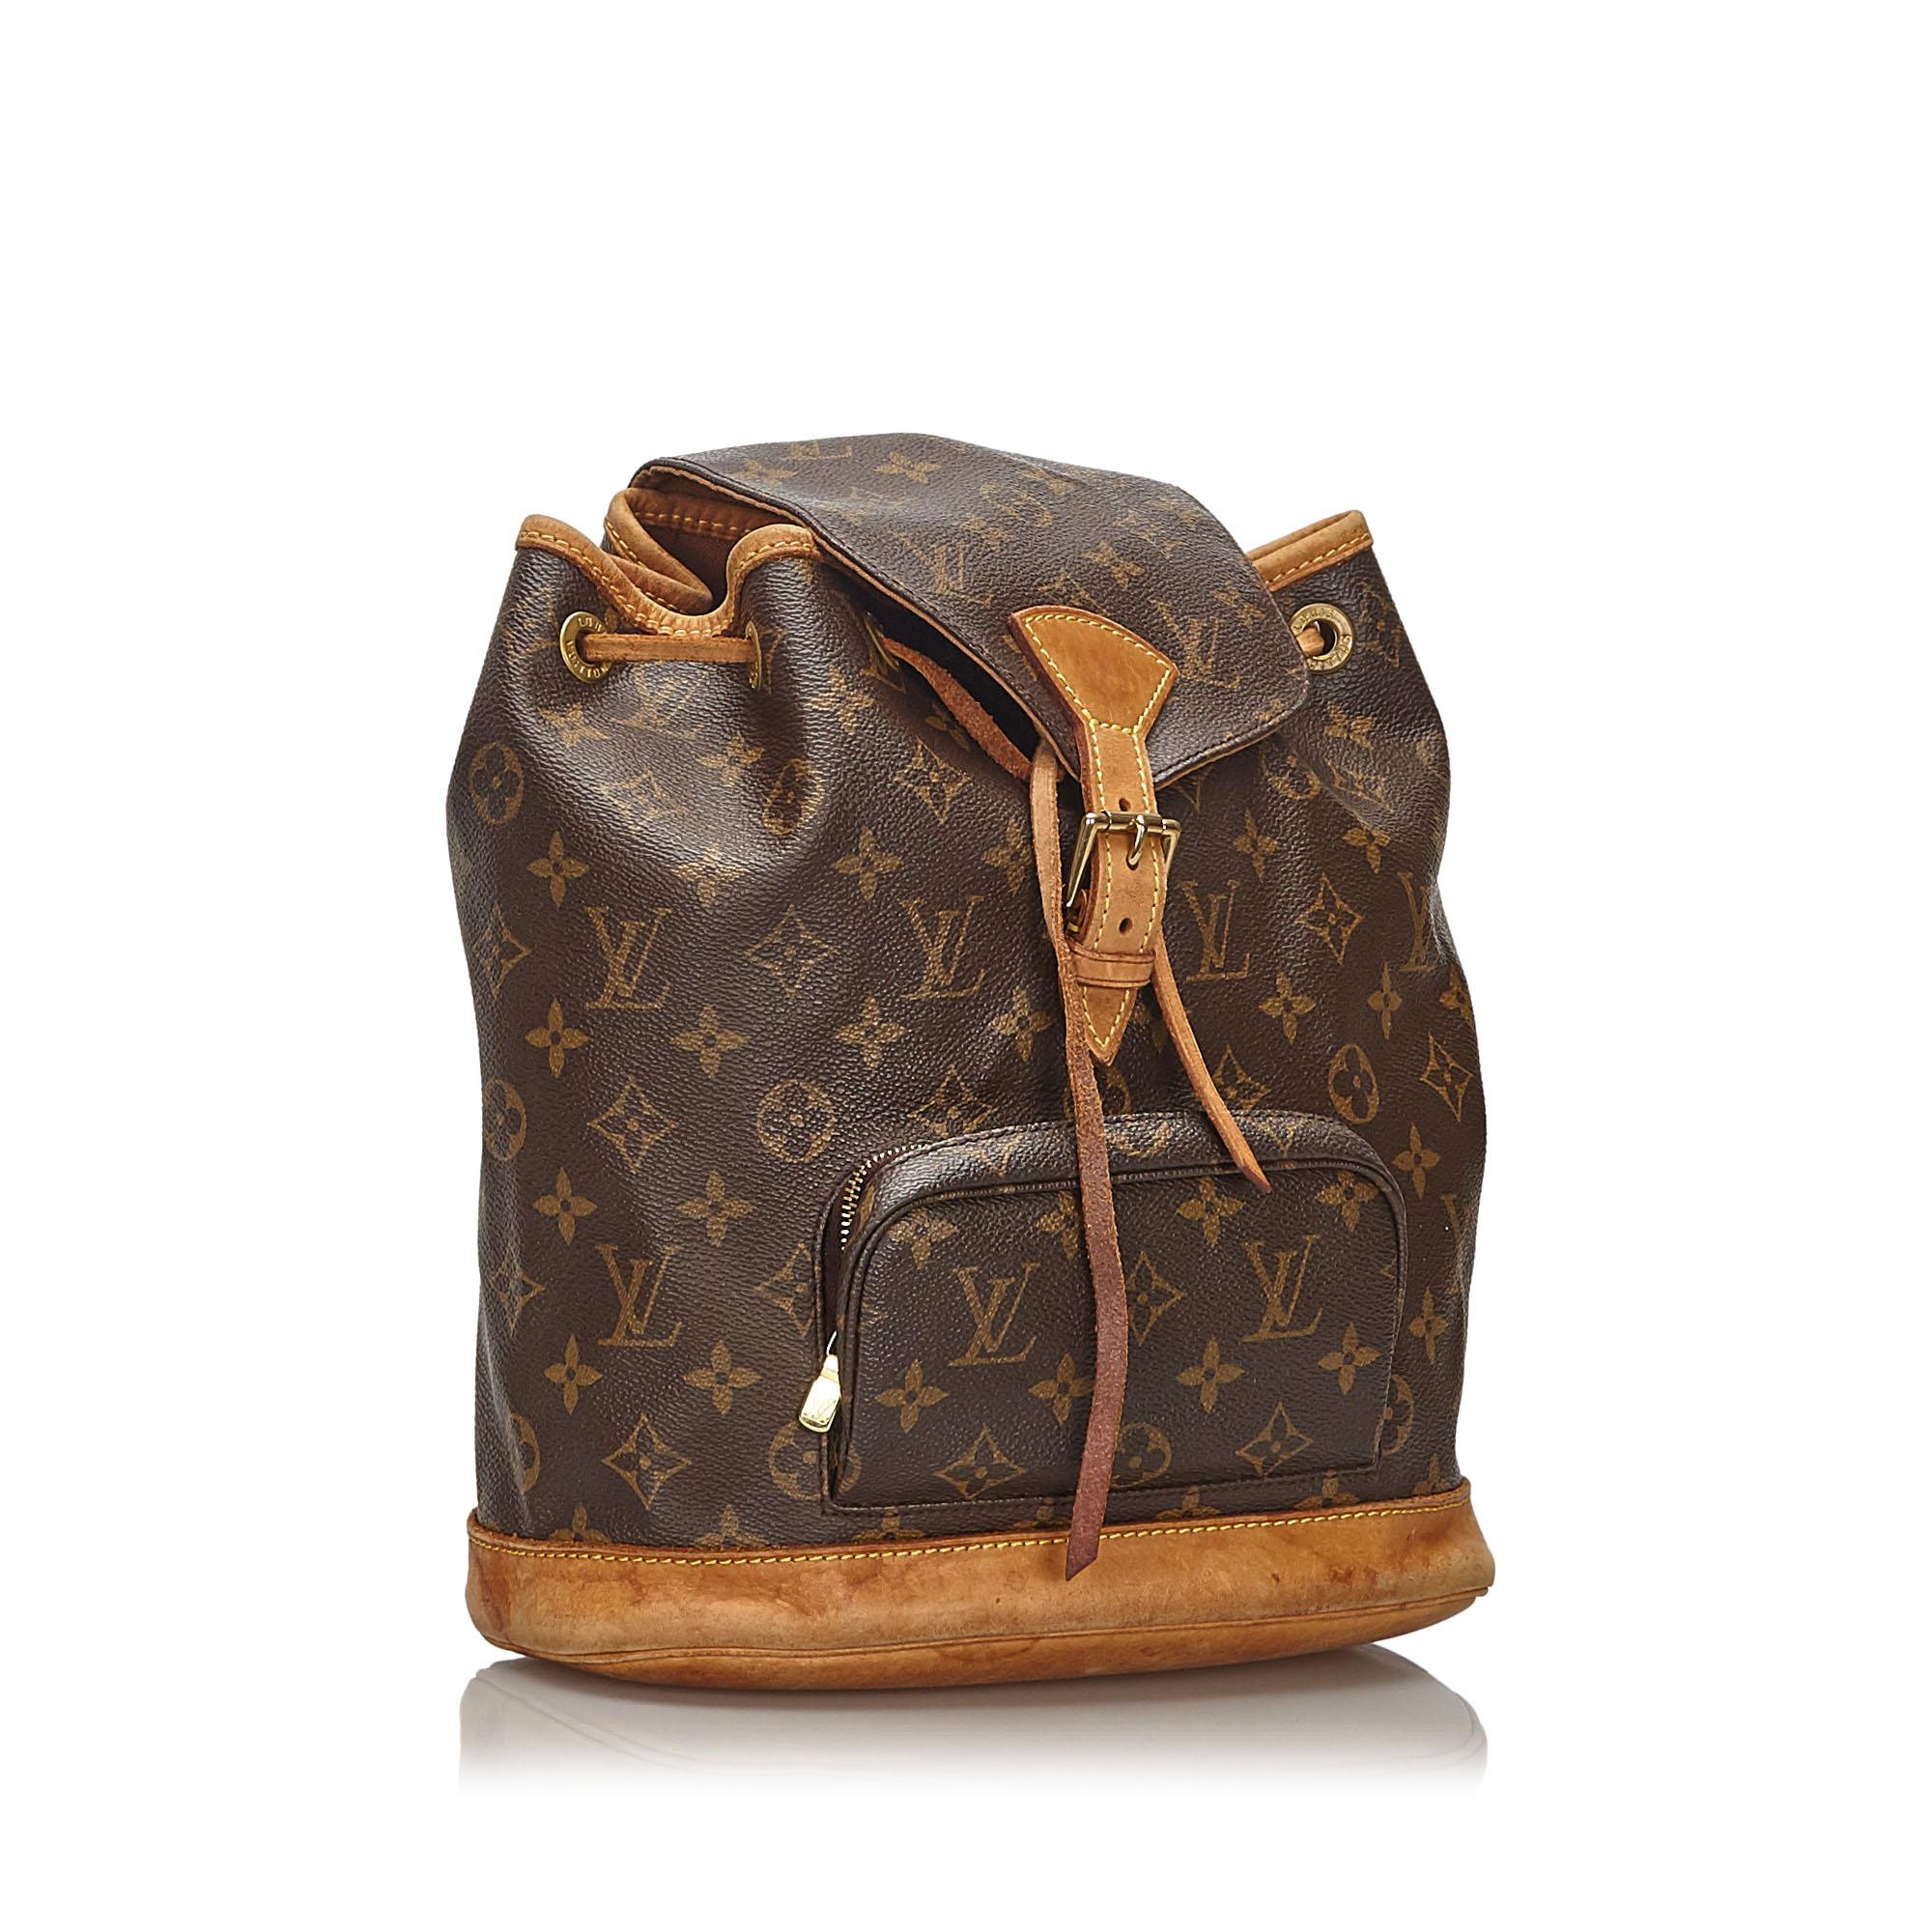 The Montsouris MM features a monogram canvas body, a front zip pocket, a front flap with a belt buckle detail, and a top drawstring closure. It carries as B condition rating.

Inclusions: 
This item does not come with inclusions.


Louis Vuitton